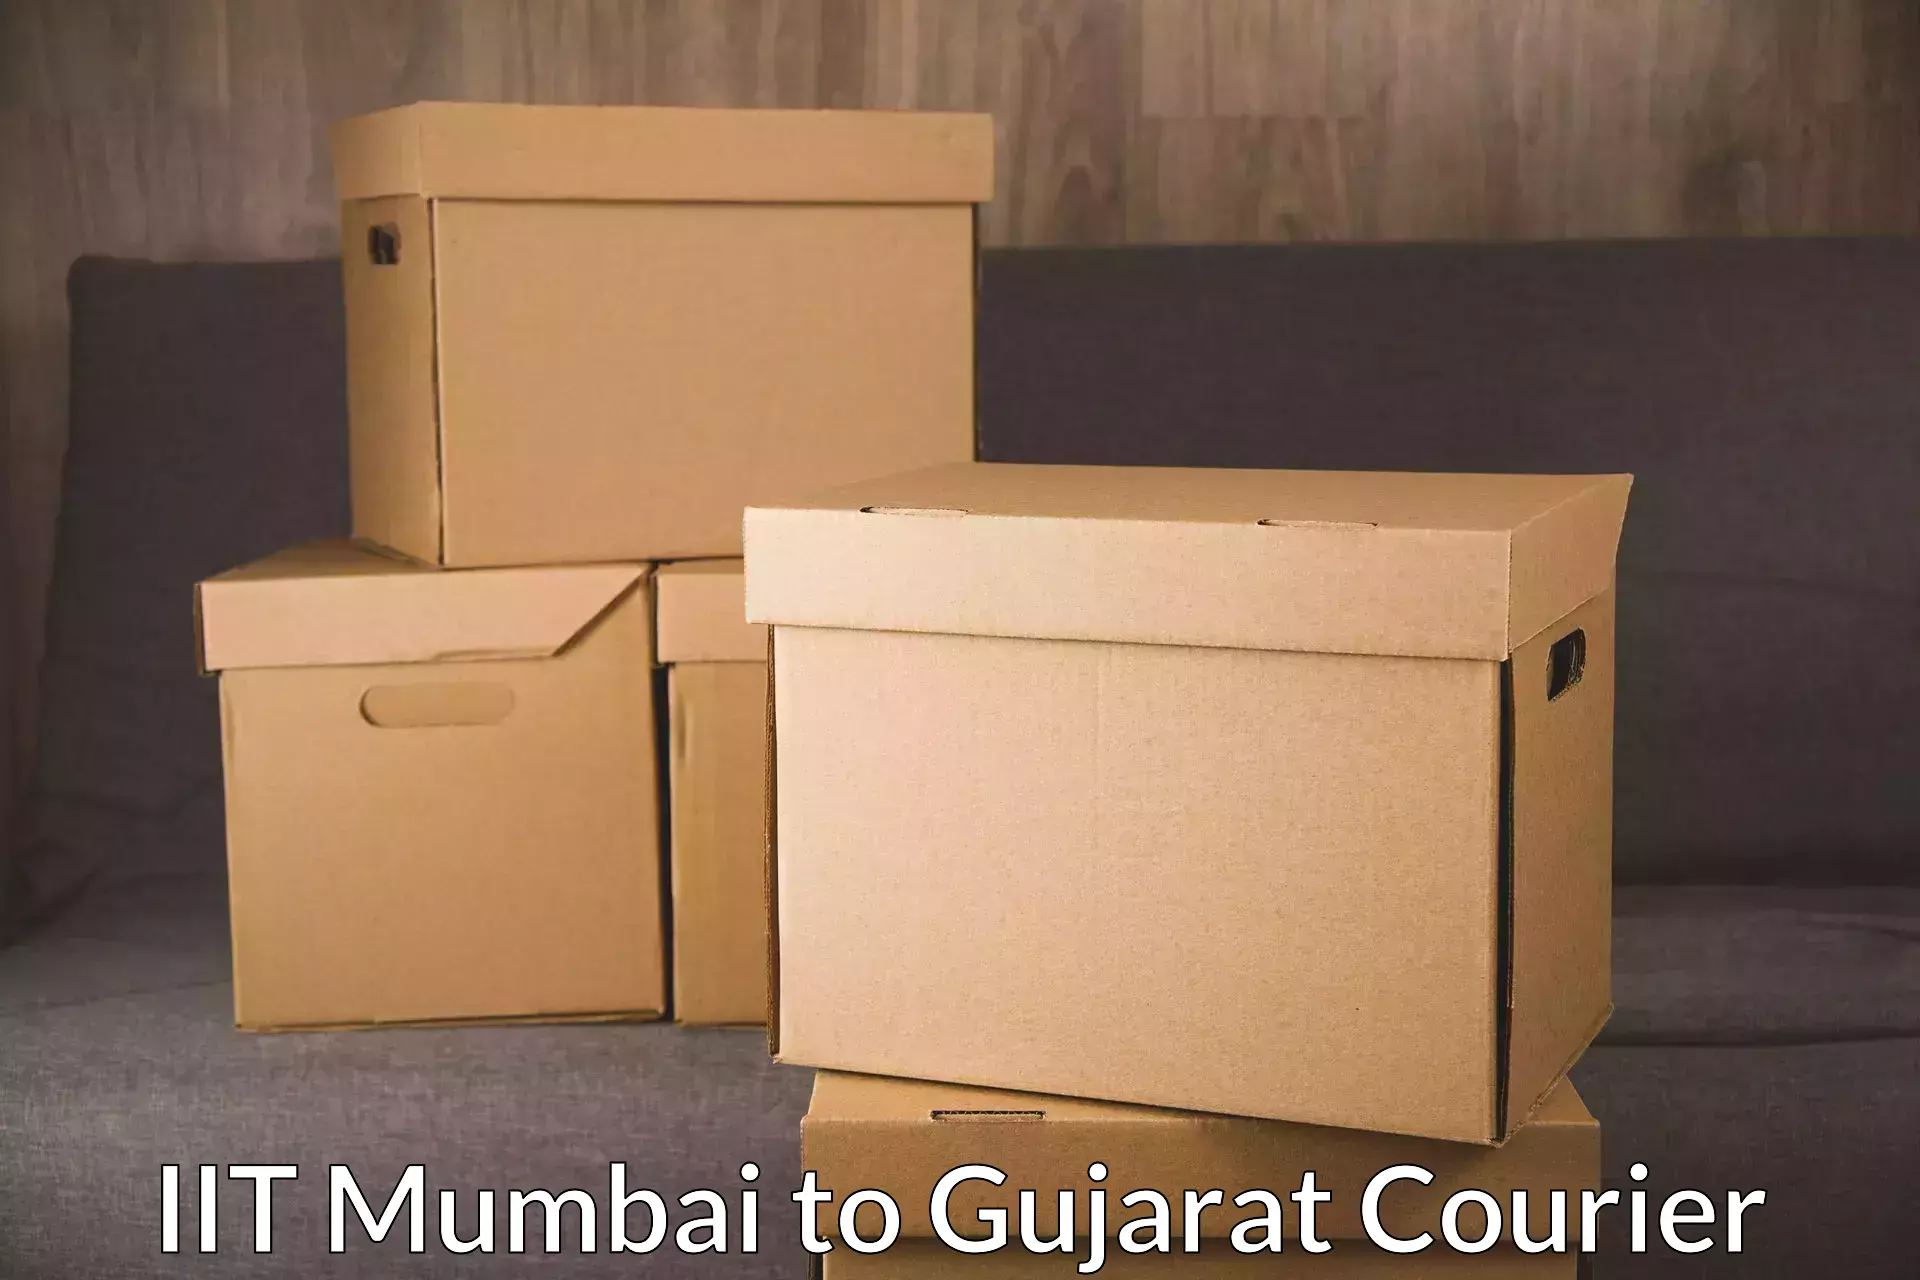 Multi-national courier services IIT Mumbai to Ahmedabad